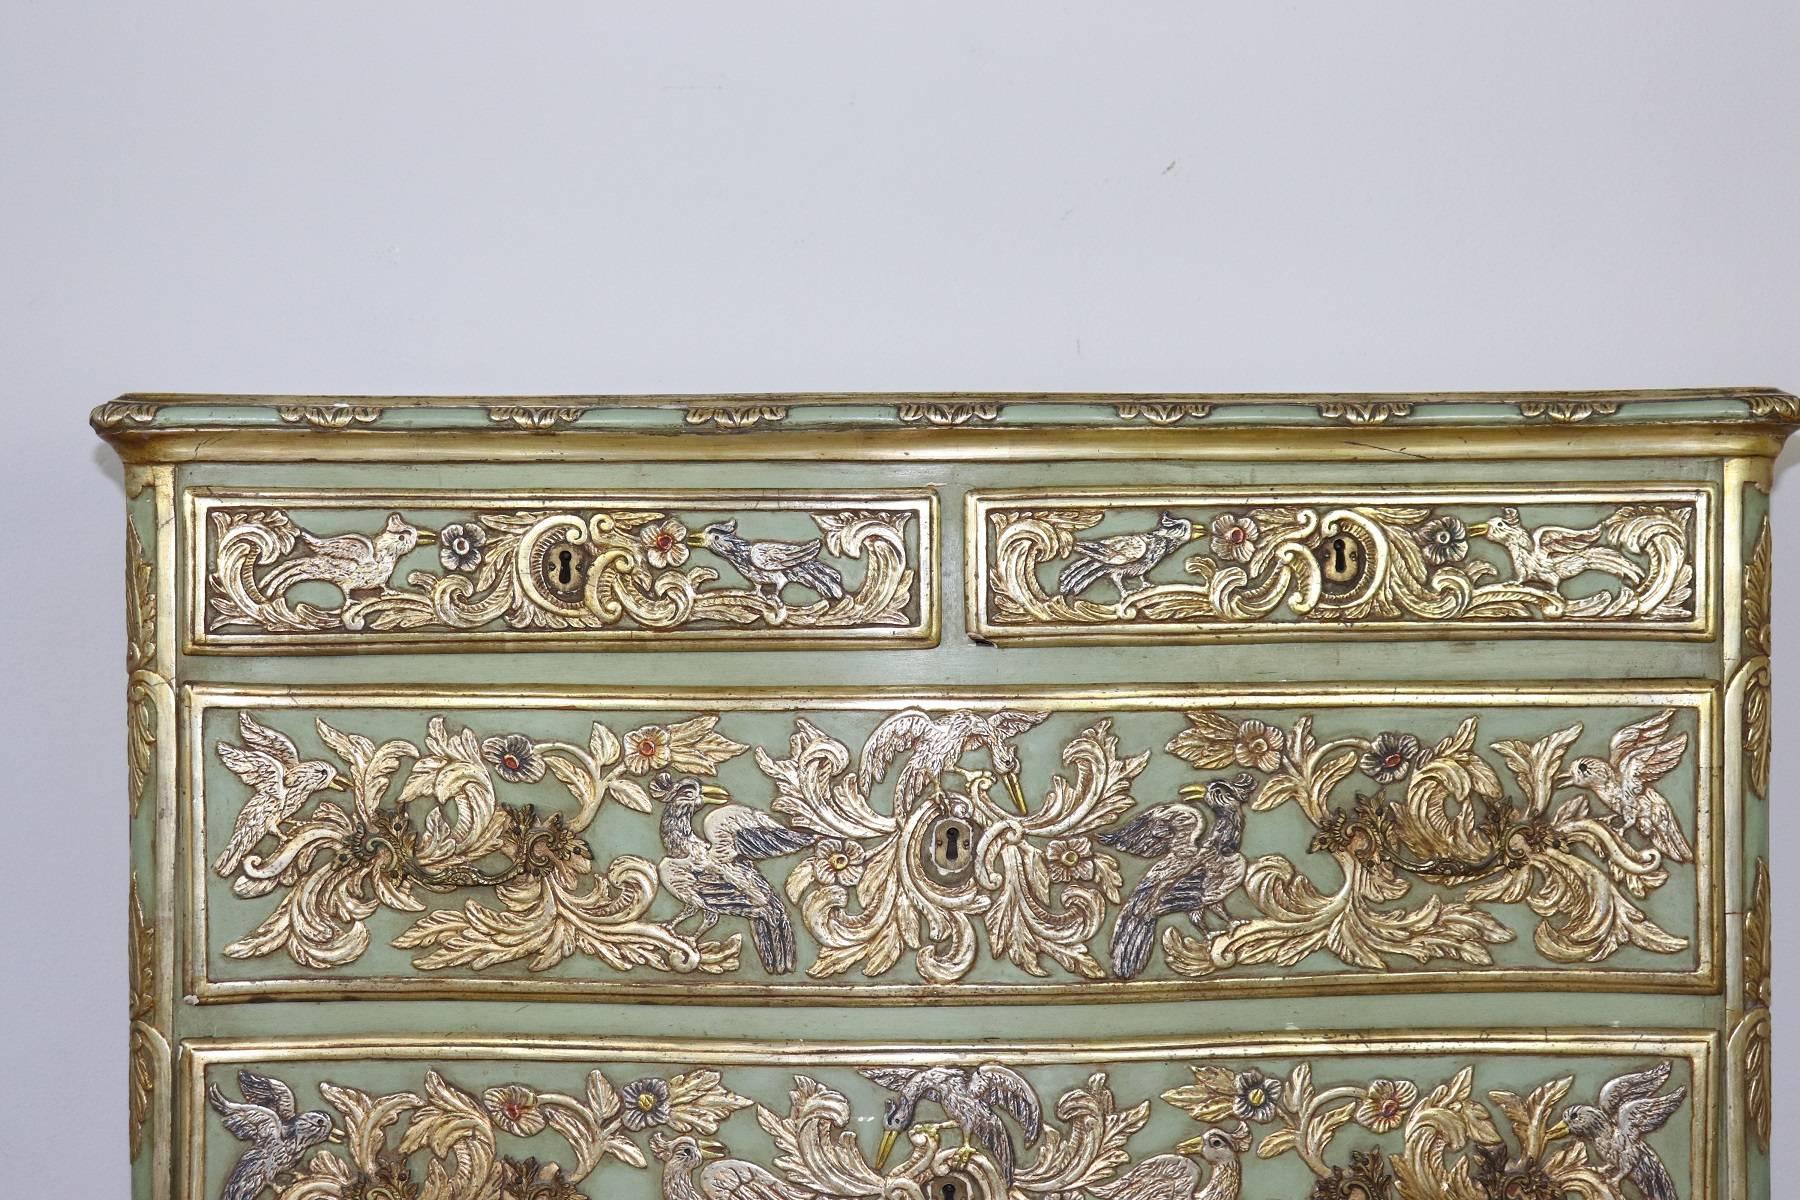 Beautiful rare antique dresser made in the first half of 1800s. The line is in perfect Louis XV style rich and sumptuous French rococo. The chest of drawers is in pale green lacquered wood with carved decorations, flowers and birds. The decorations